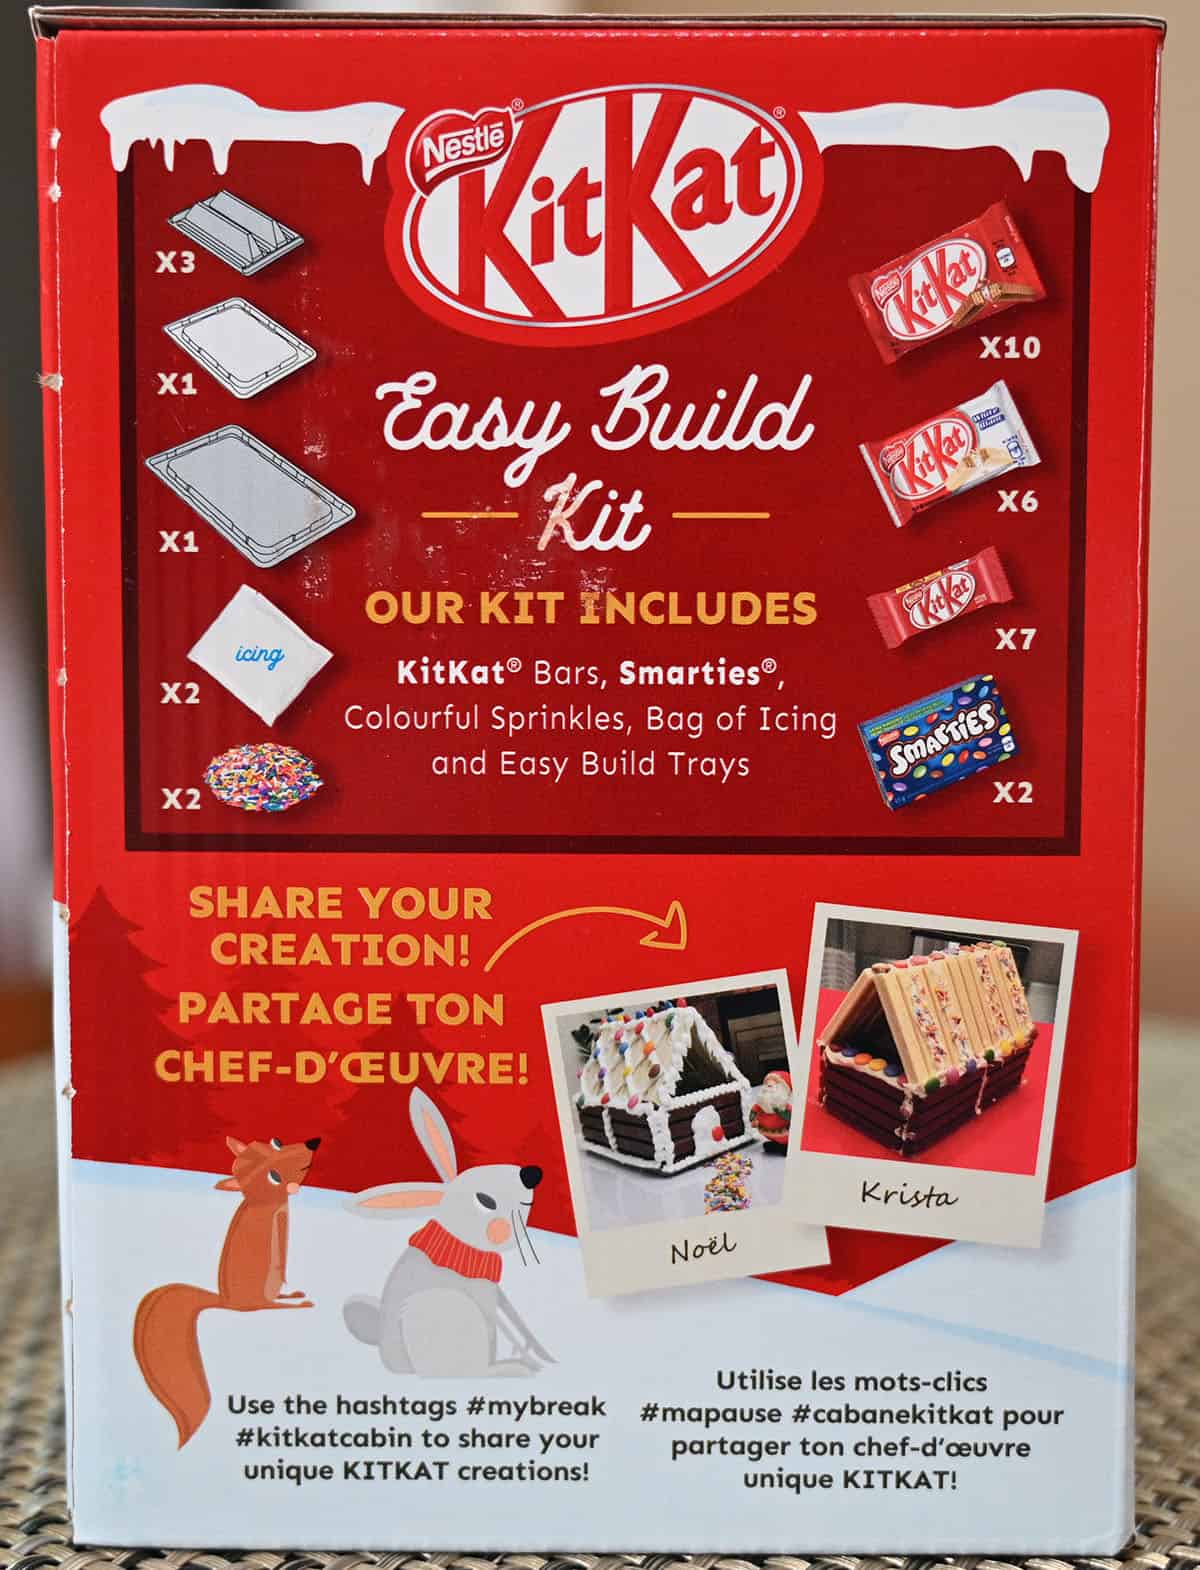 Image of the side of the box that shows everything that is included in the kit and encourages others to share their creation on social media.